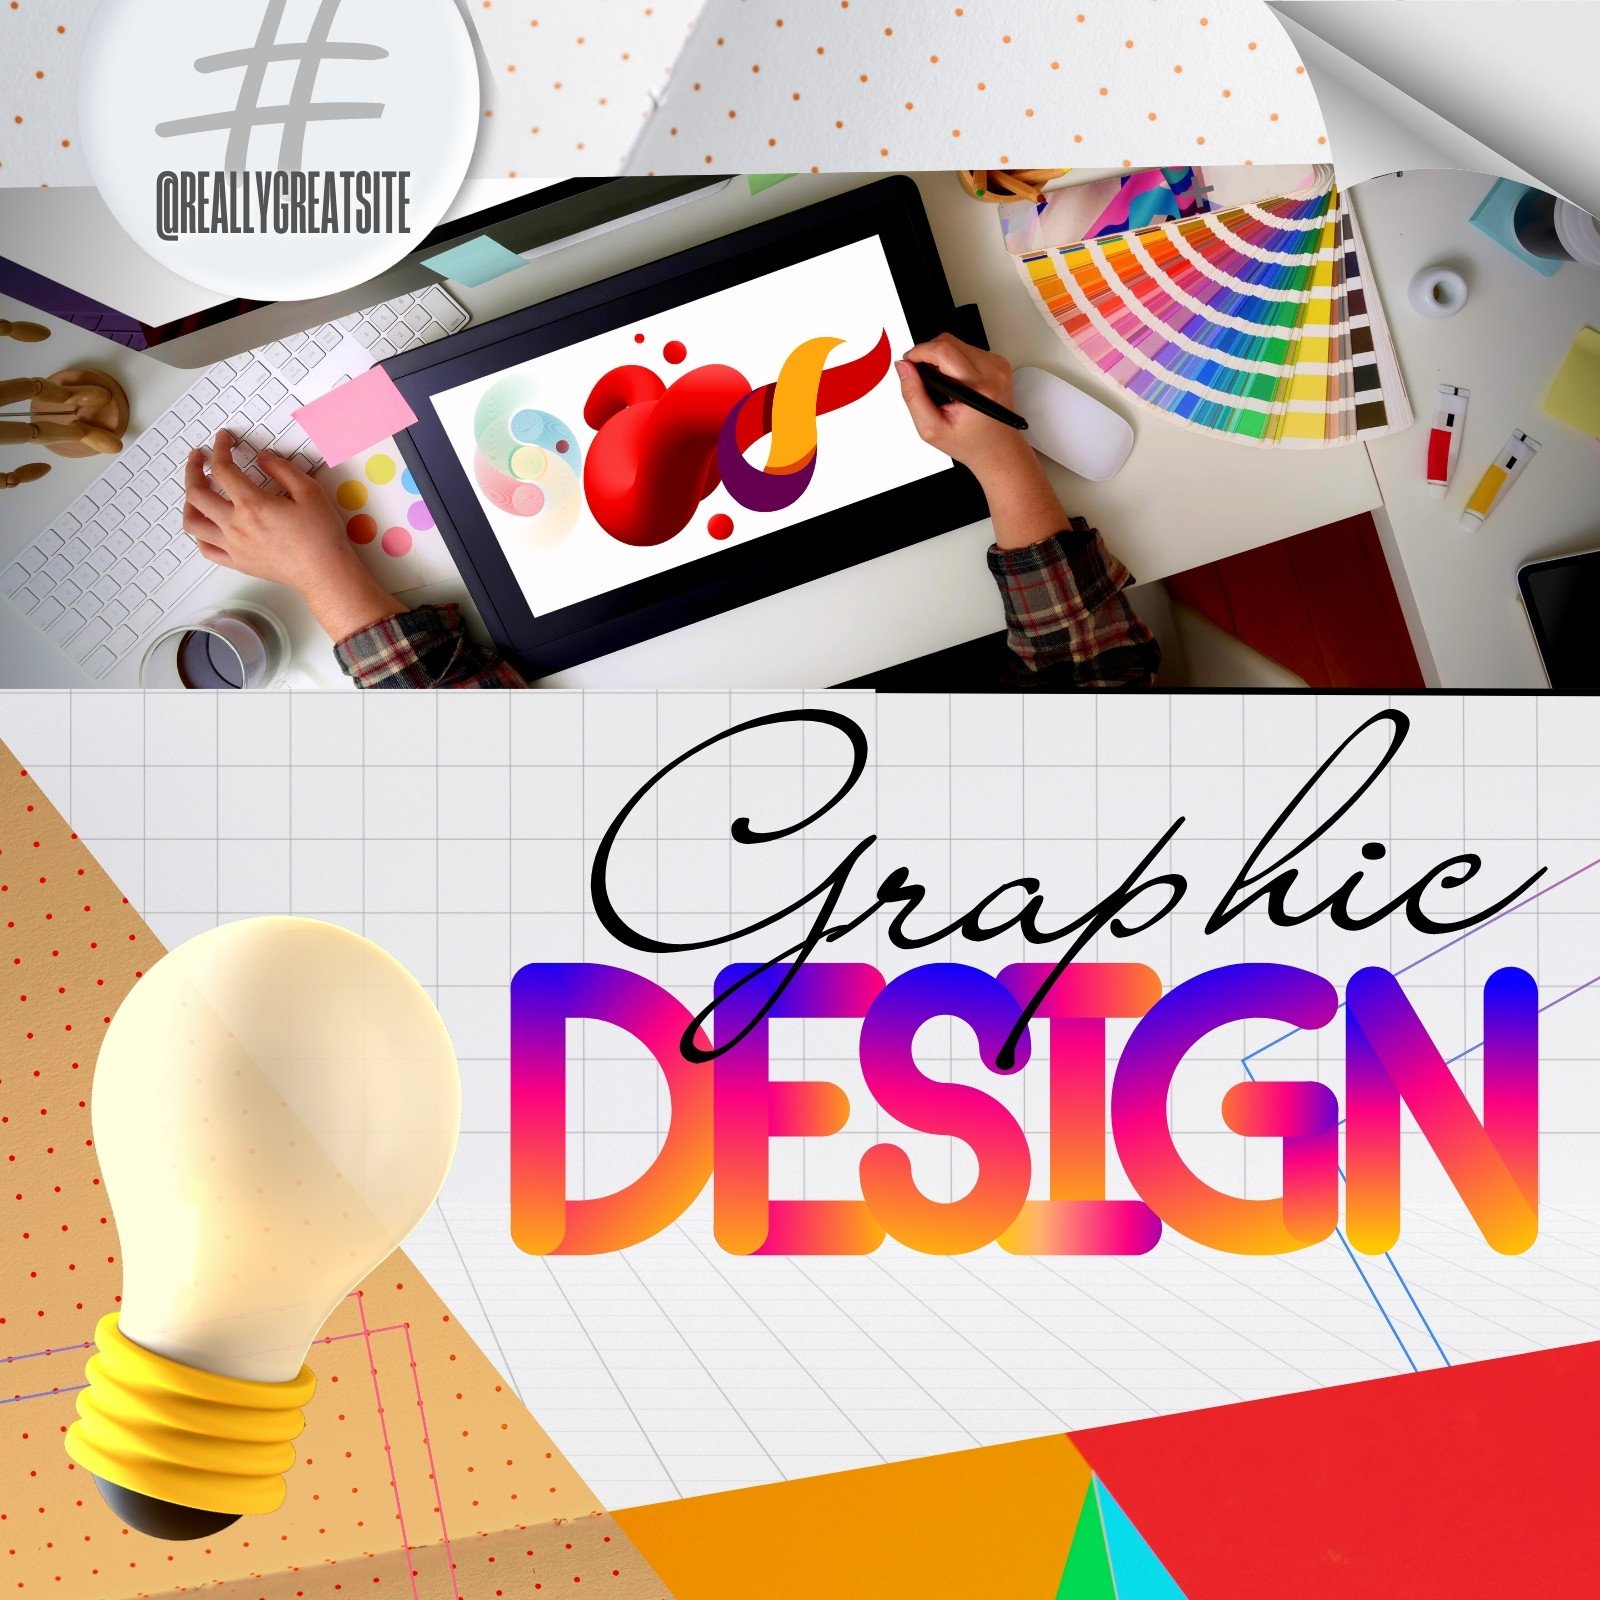 3D Sculpting designs, themes, templates and downloadable graphic